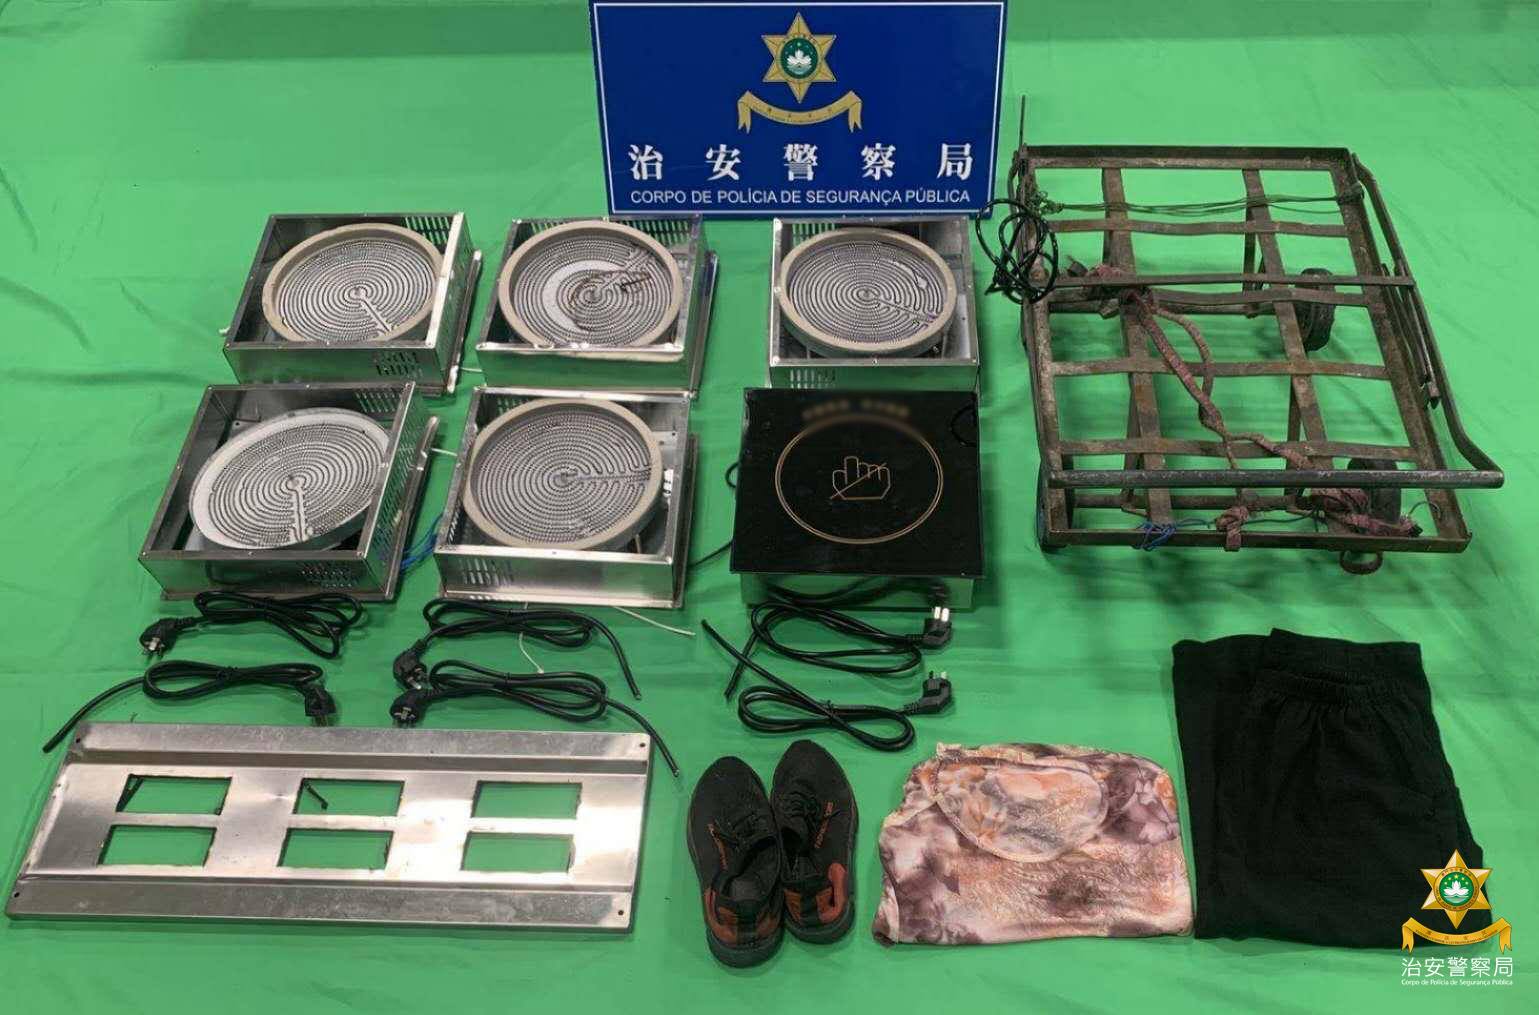 Woman, 71, steals 6-plate induction stove, sells parts